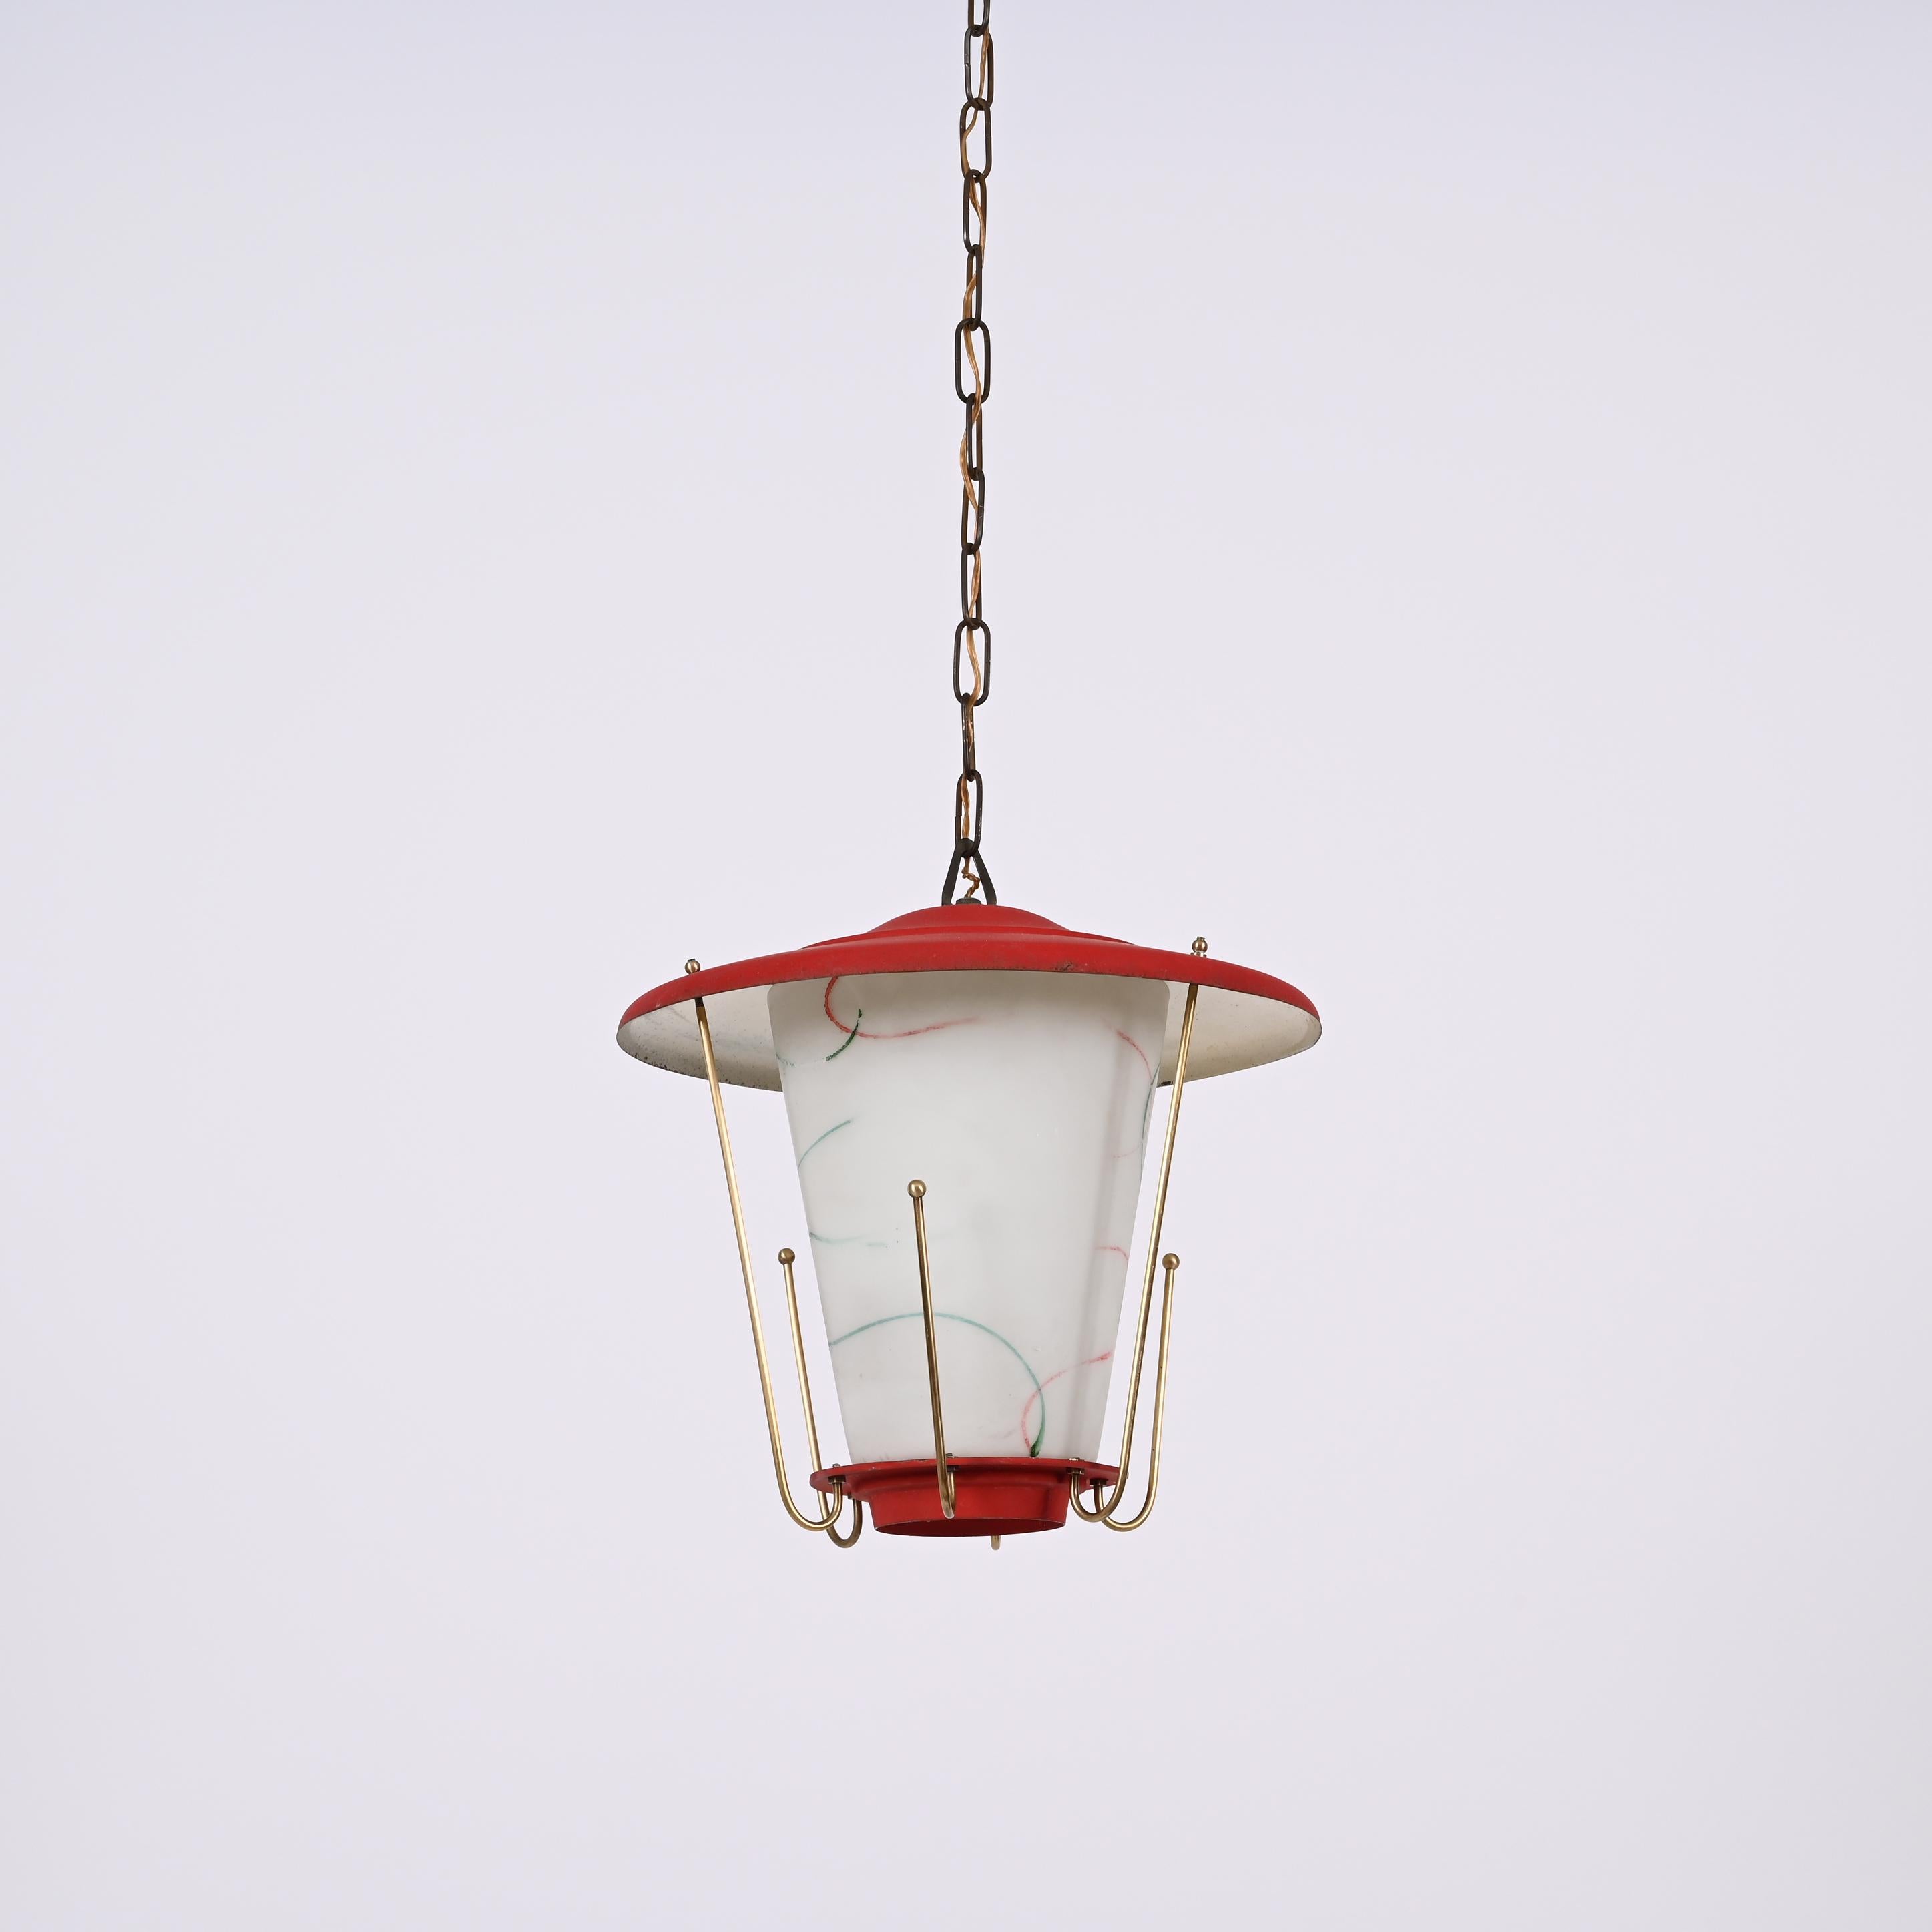 Amazing midcentury round opaline glass and brass red lantern chandelier. This fantastic piece was designed in Italy during the 1950s.

This piece is wonderful as the combination of materials and colours is very typical of the time and the with